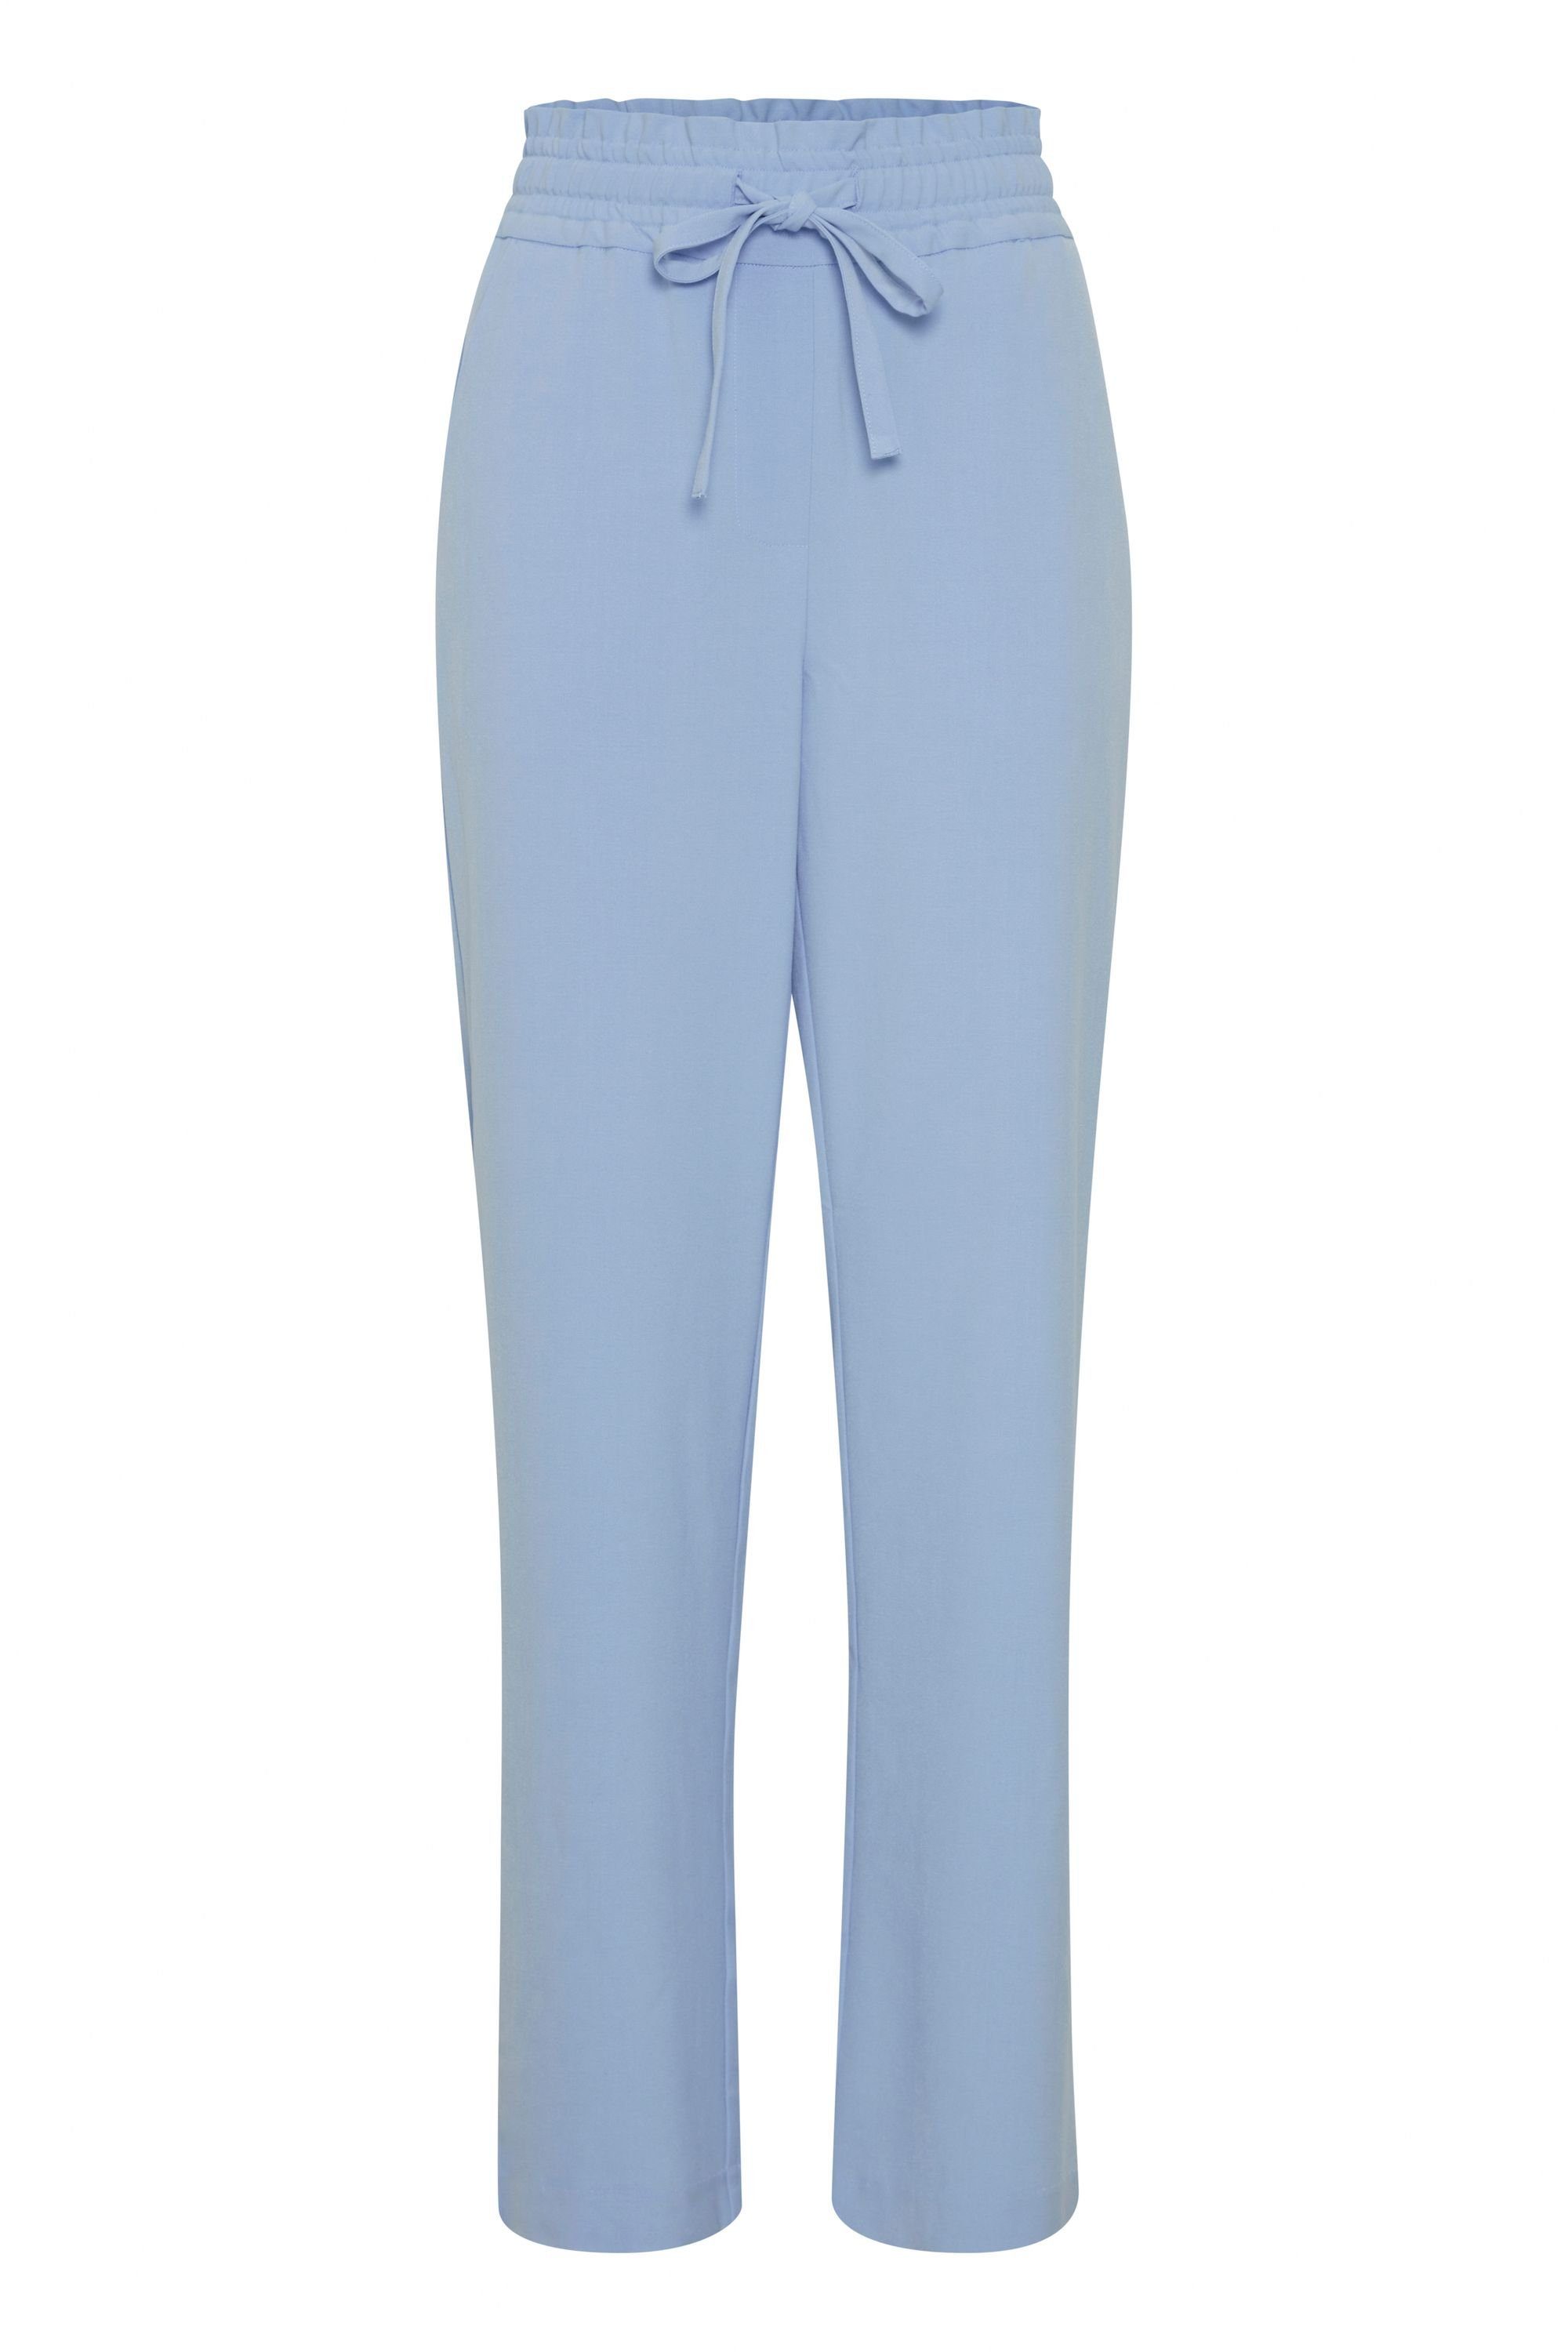 b.young Bell - (144121) 20813077 Jogger CASUAL BYDANTA PANT Blue Y Pants